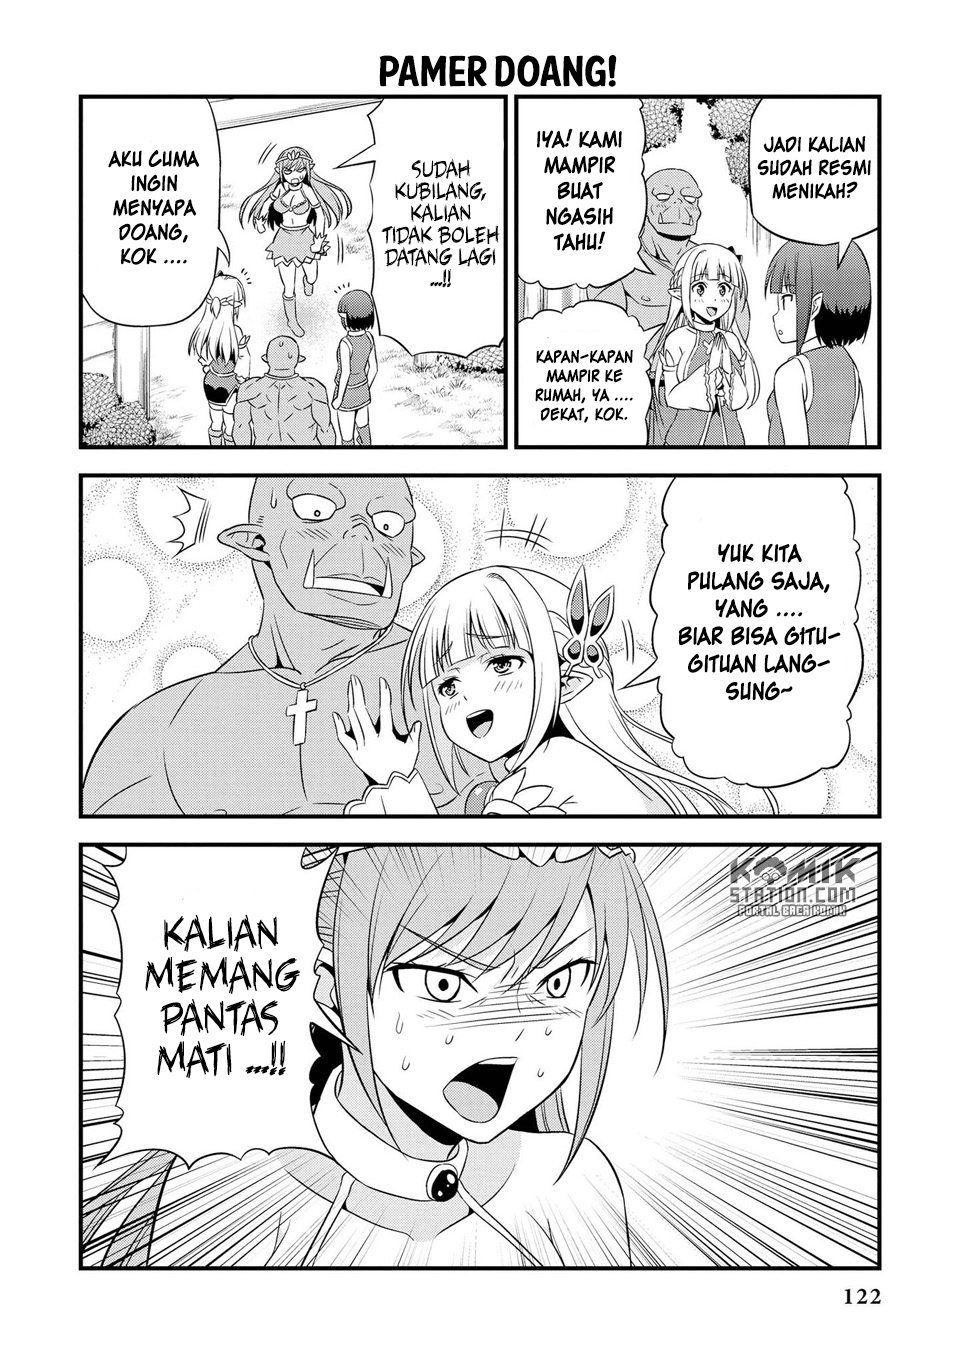 Hentai Elf to Majime Orc Chapter 9.9